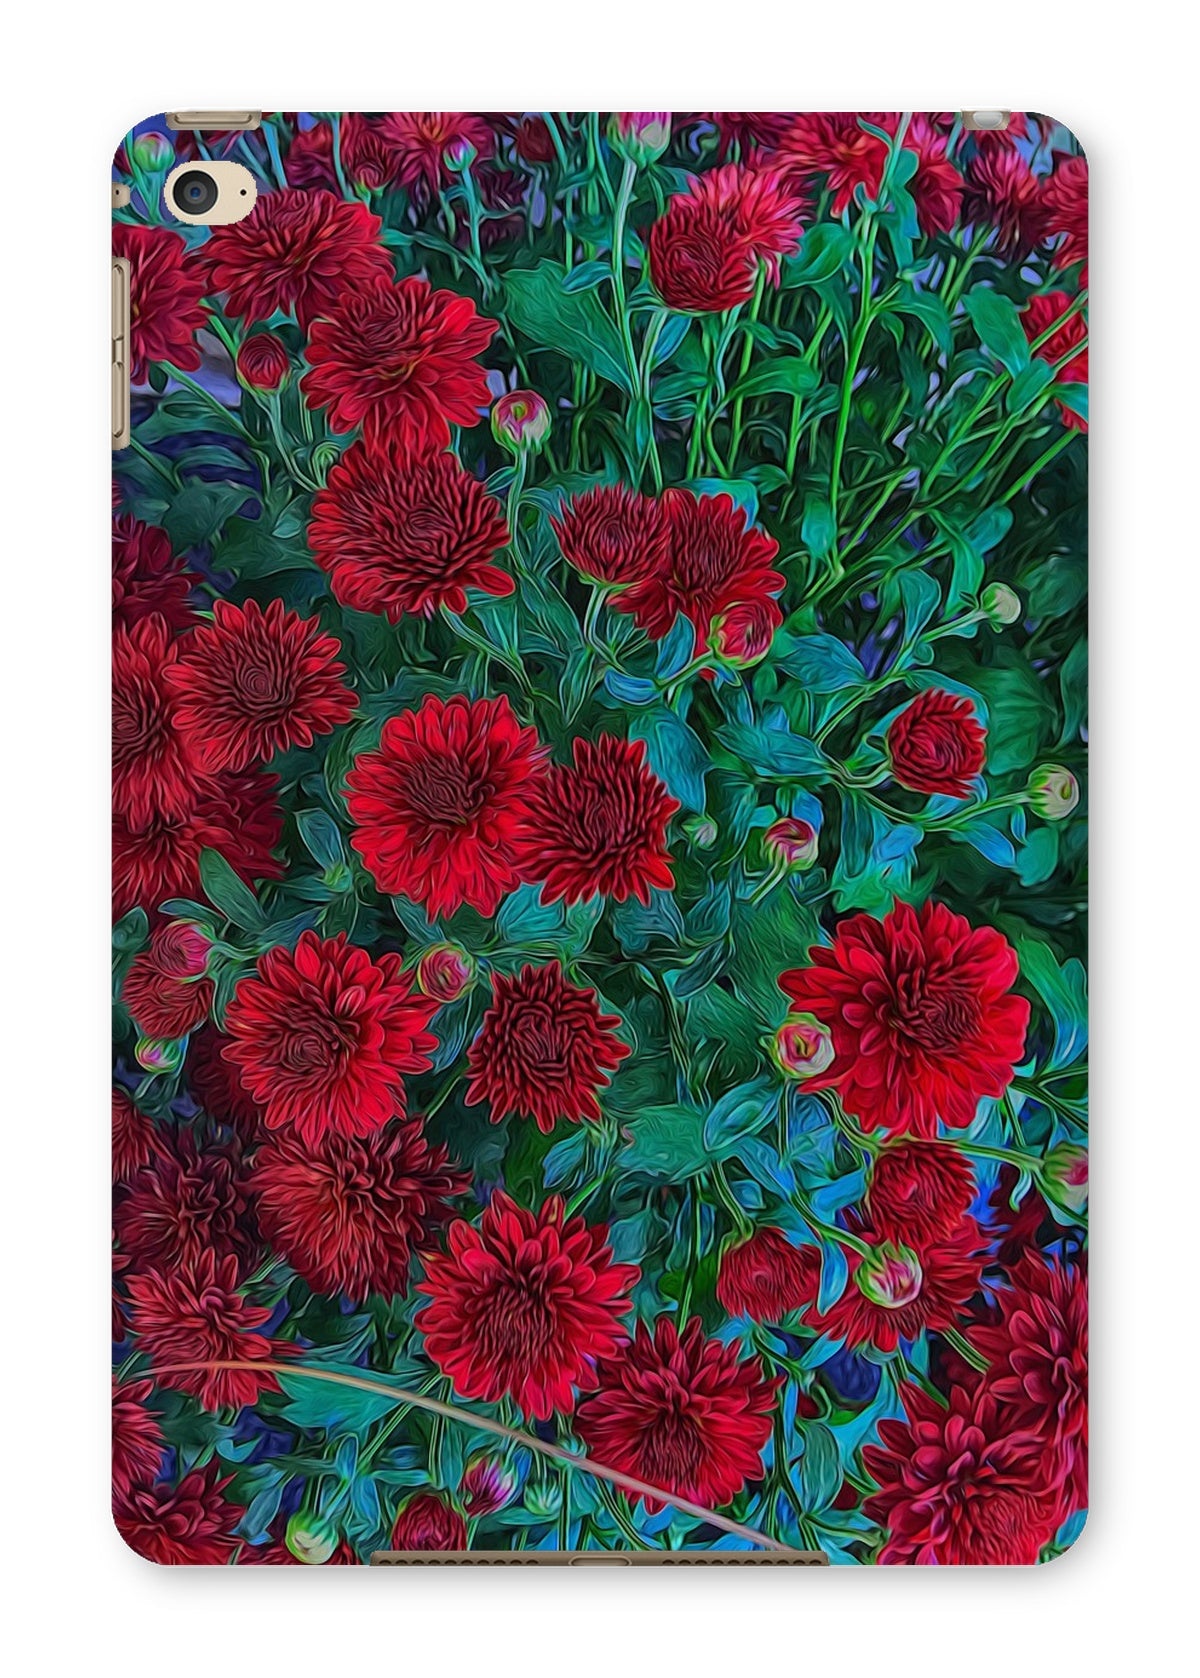 Red Mums Tablet Cases